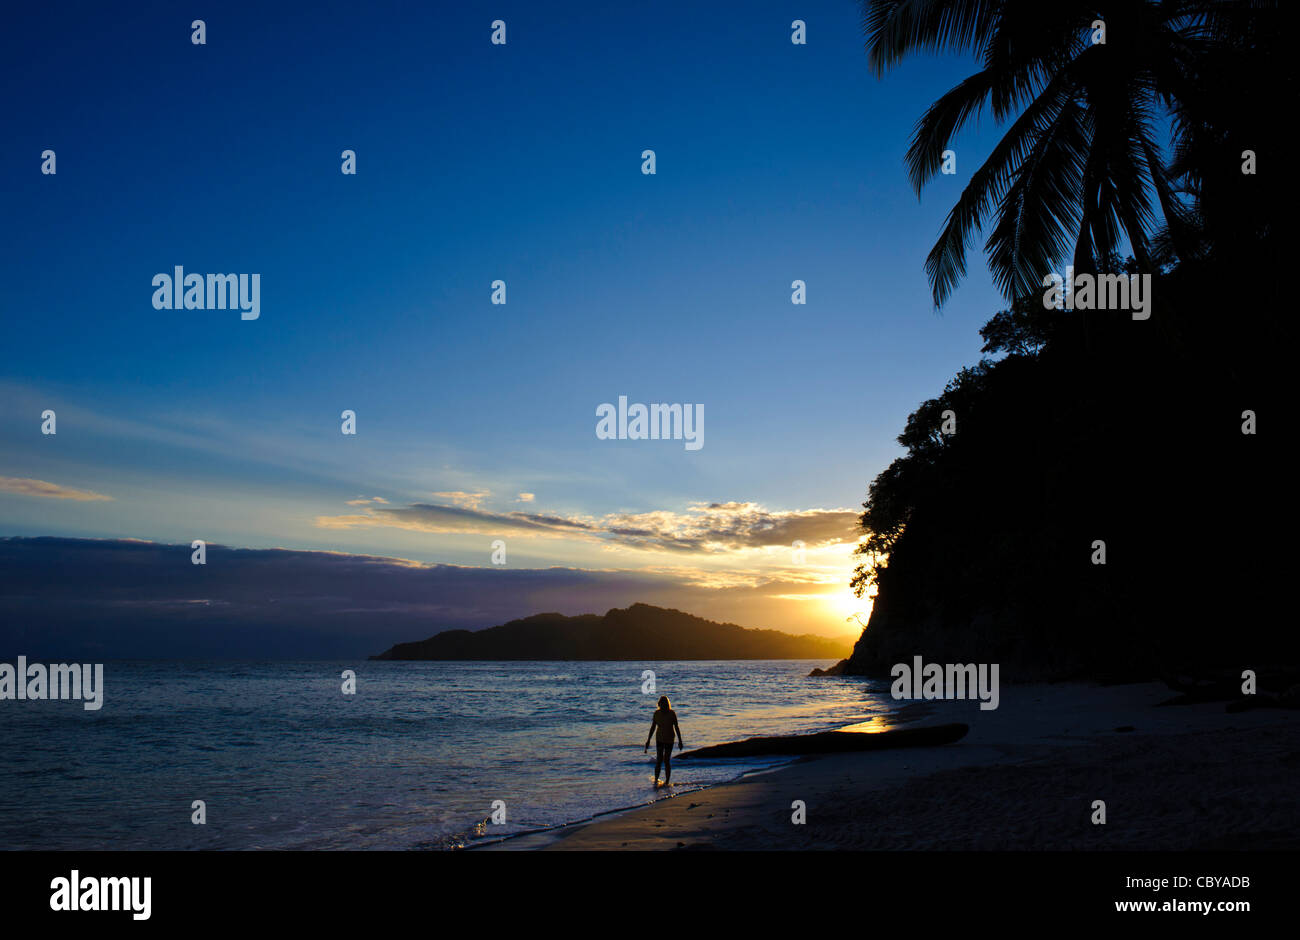 Woman walking at beach in Costa Rica at sunset with palm trees Stock Photo